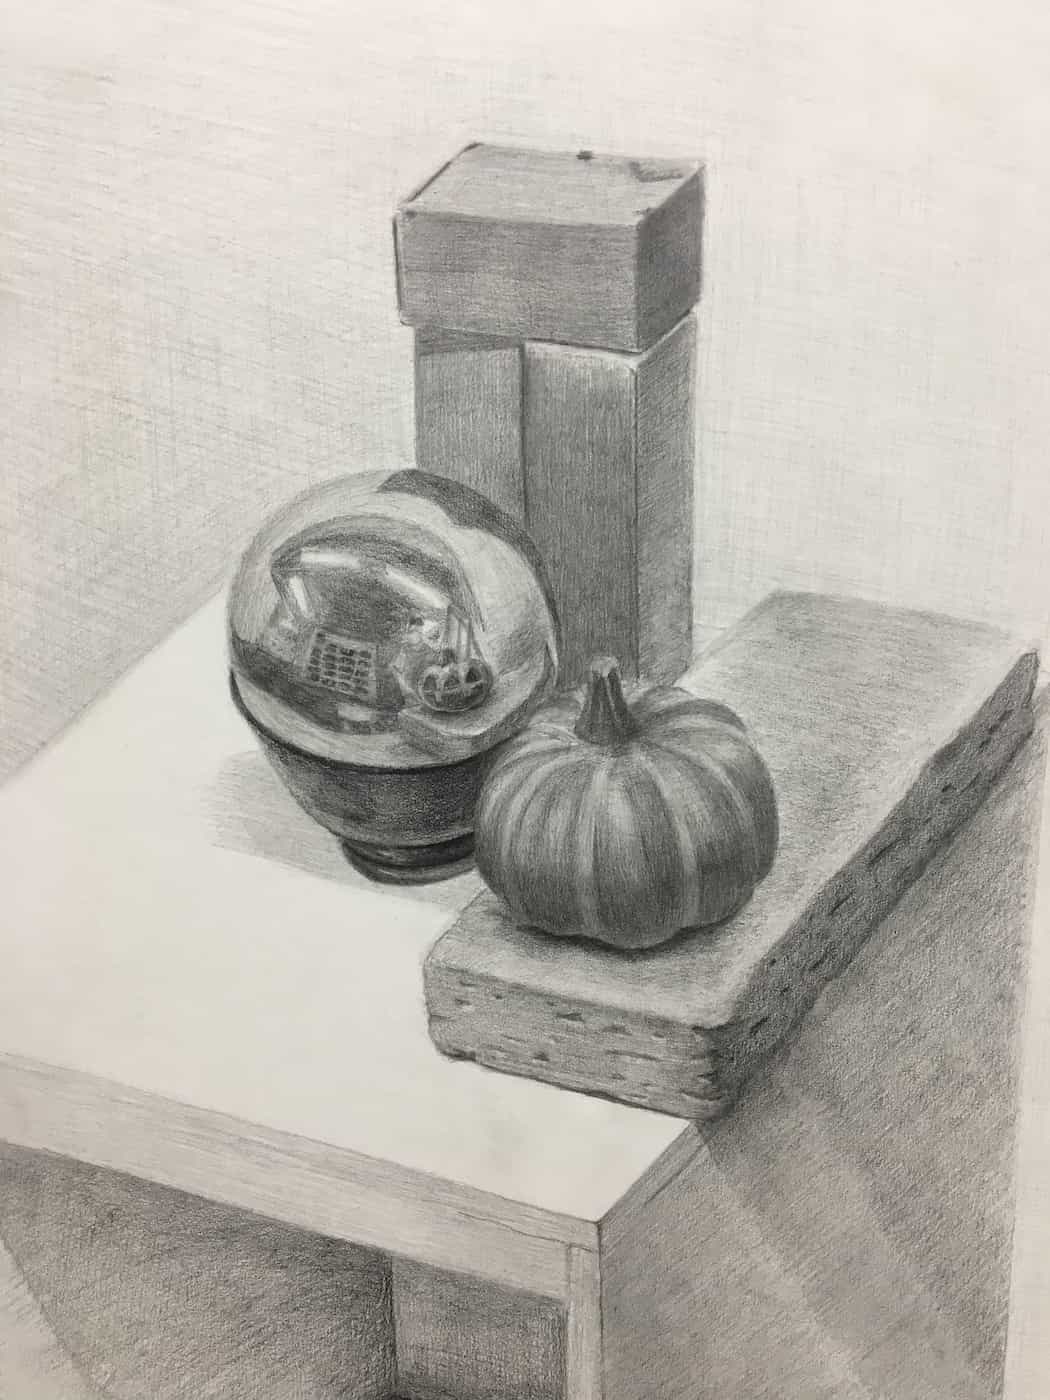 Pencil drawing of a pumpkin, mirror ball, and brick on a table.